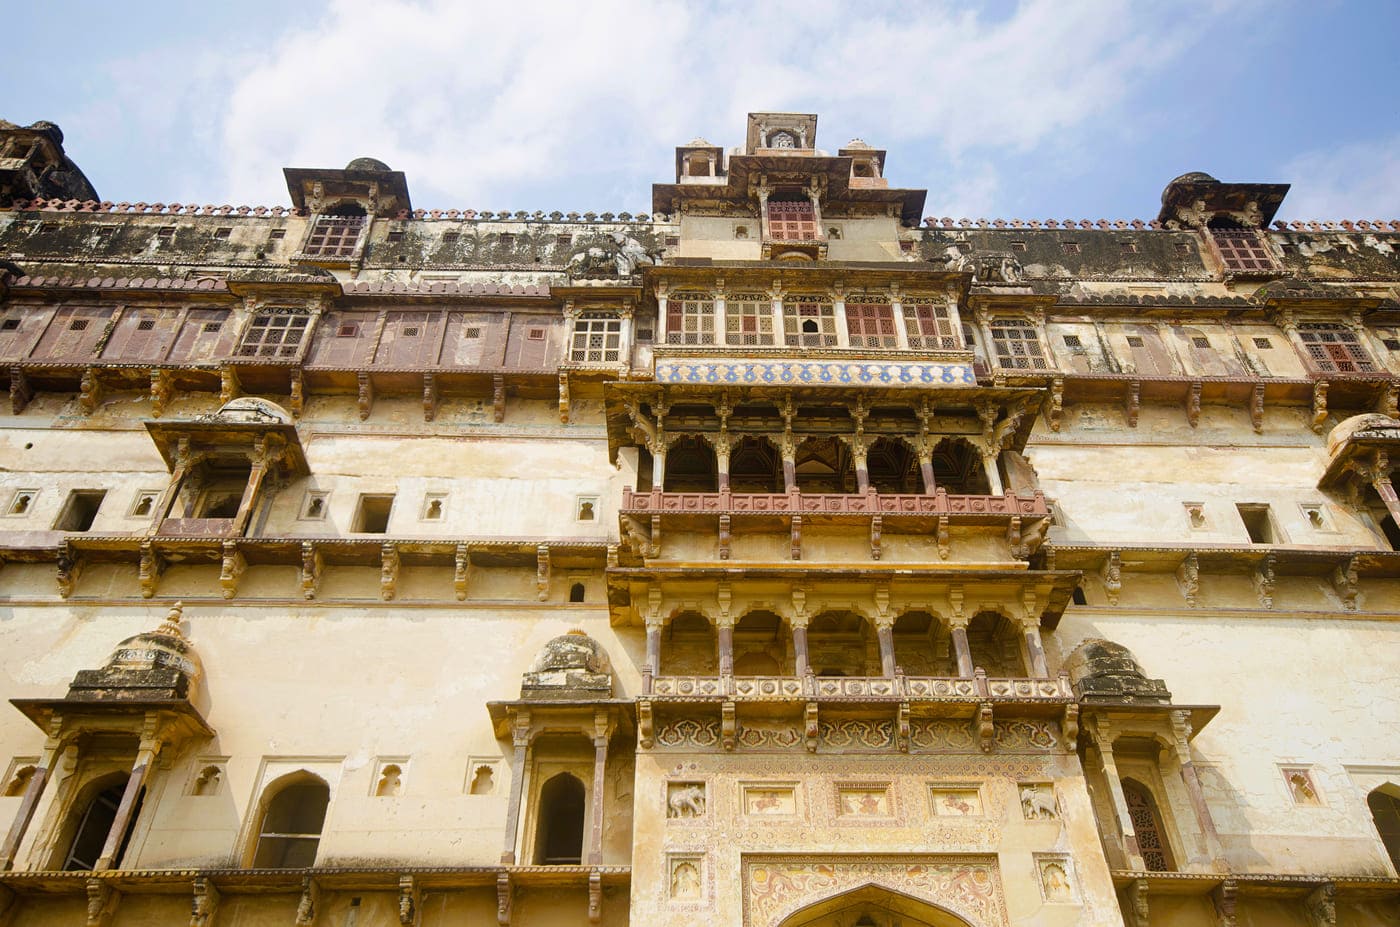 Zoomed out, the Datia Palace looks even more majestic with its carefully crafted carvings and wall decorations made by local artisans centuries ago, Madhya Pradesh 